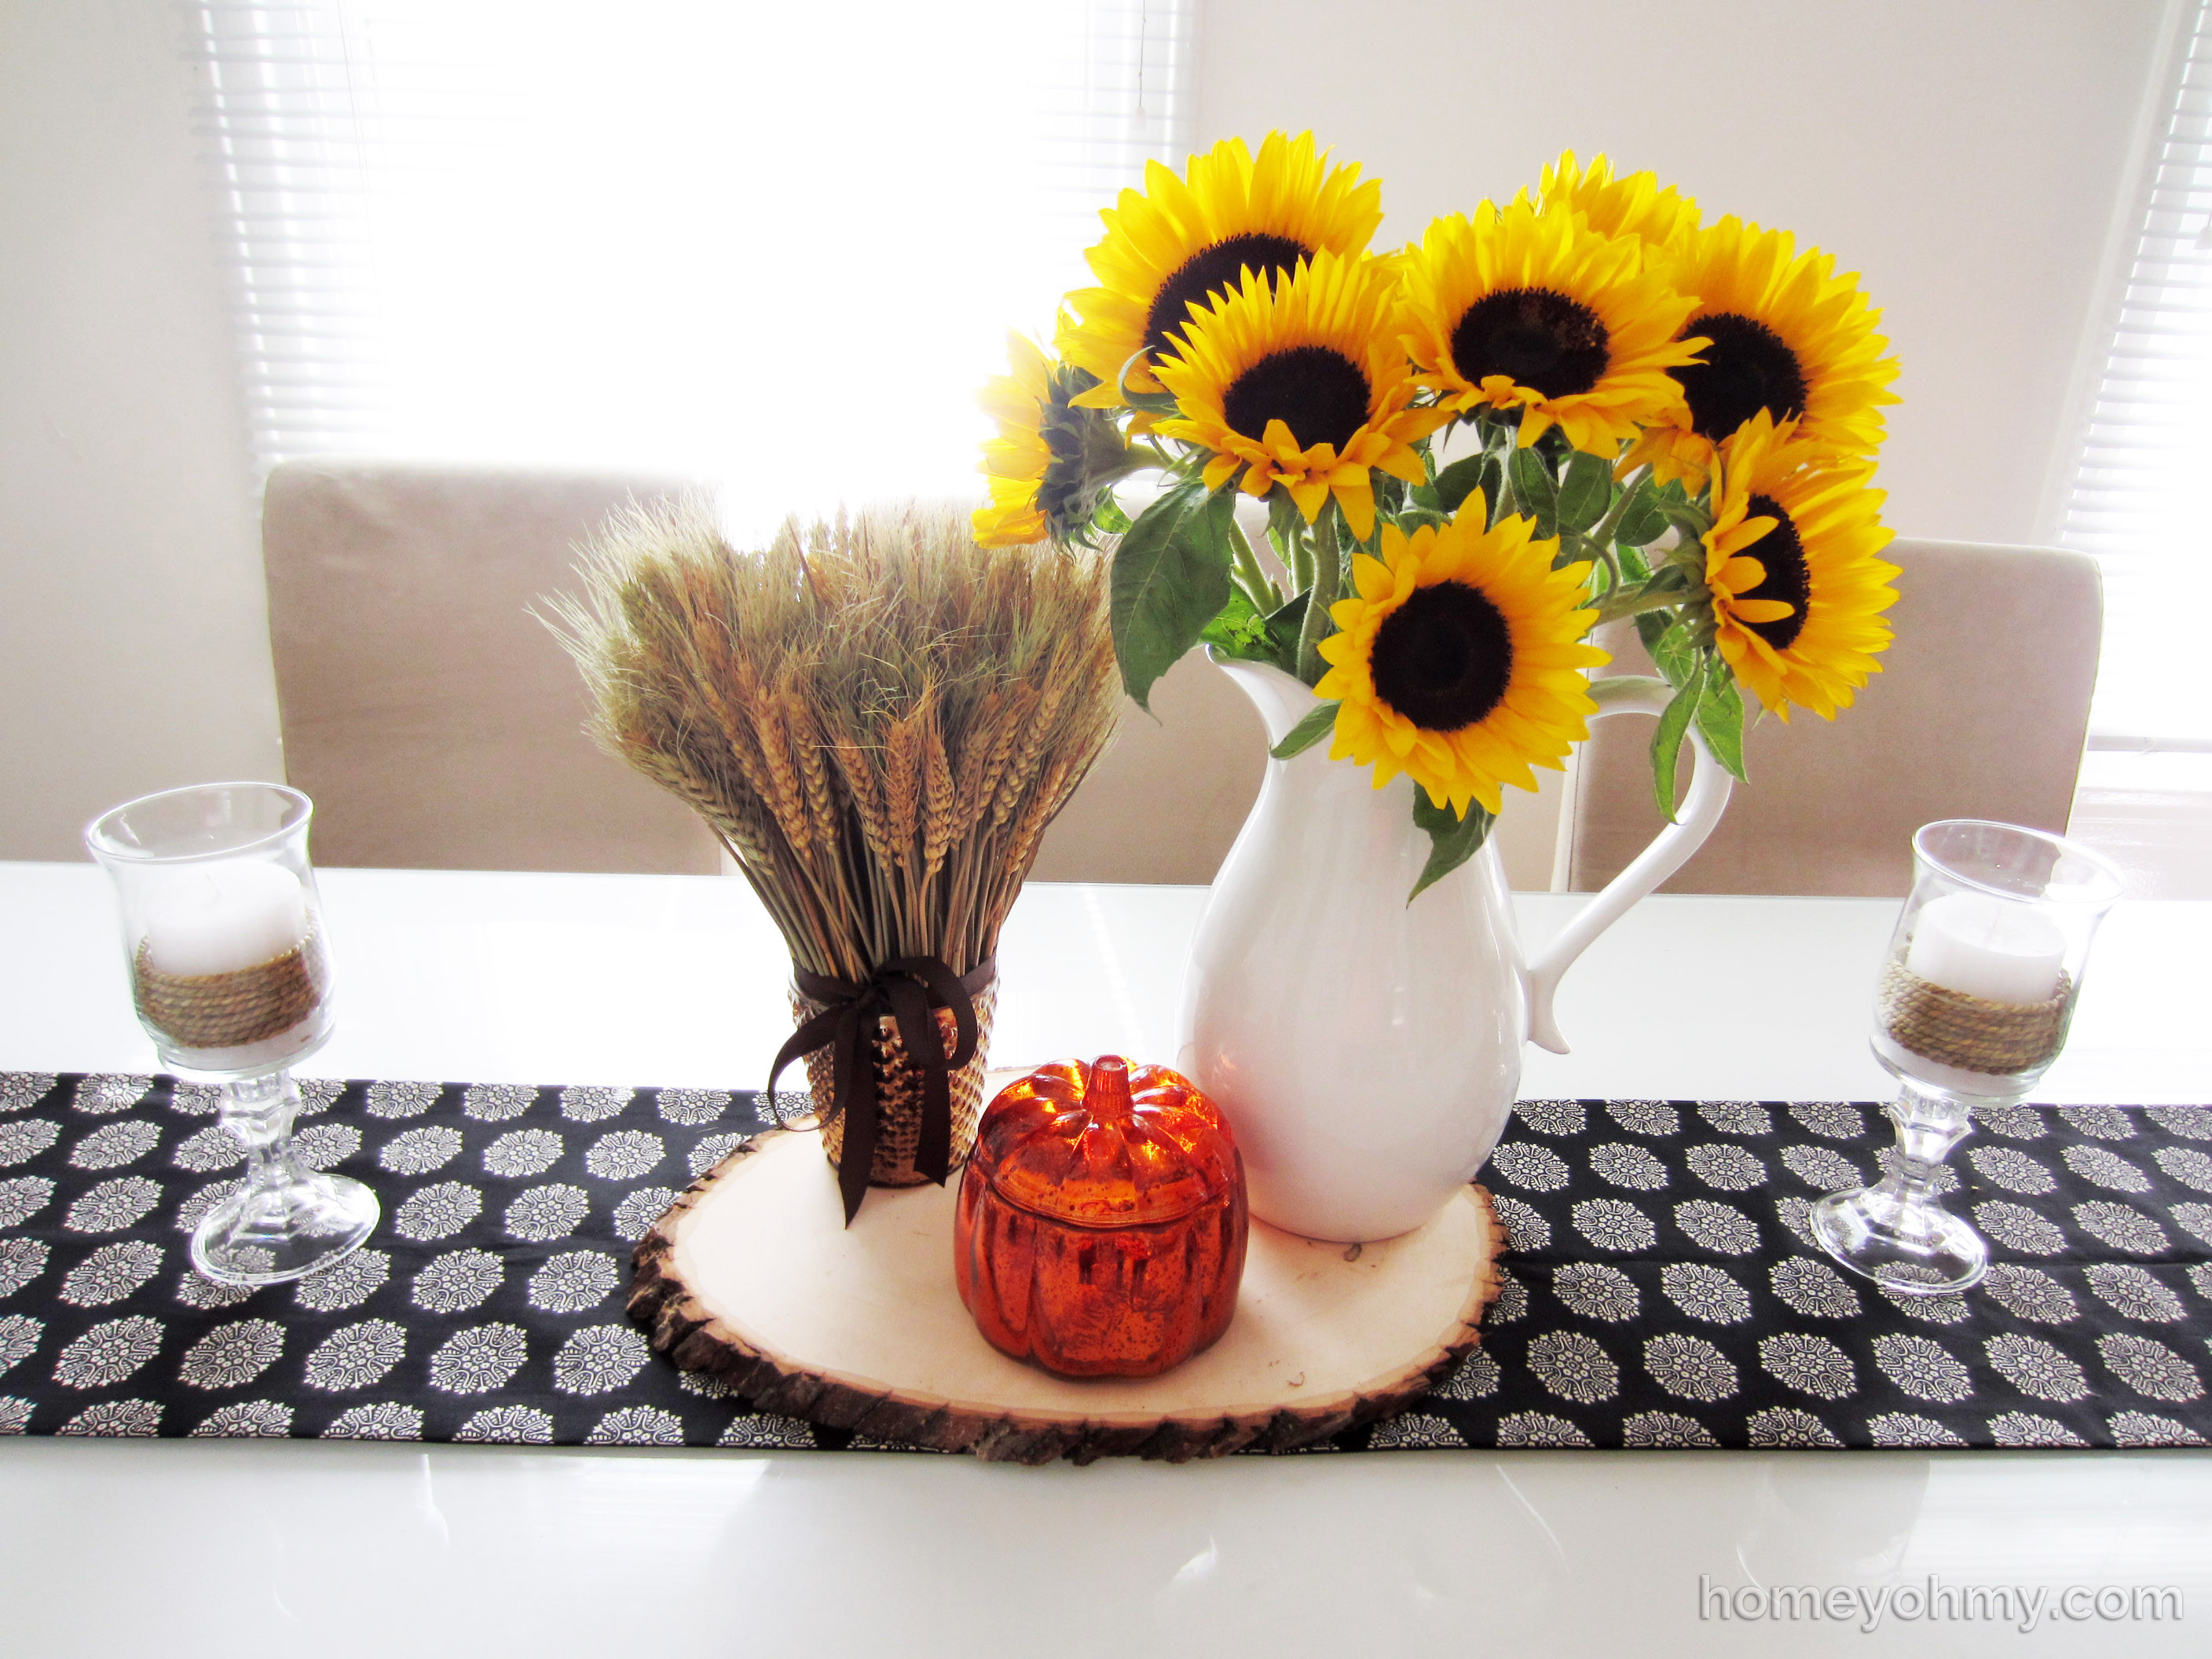 Best ideas about DIY Table Runner
. Save or Pin DIY No Sew Table Runner Homey Oh My Now.